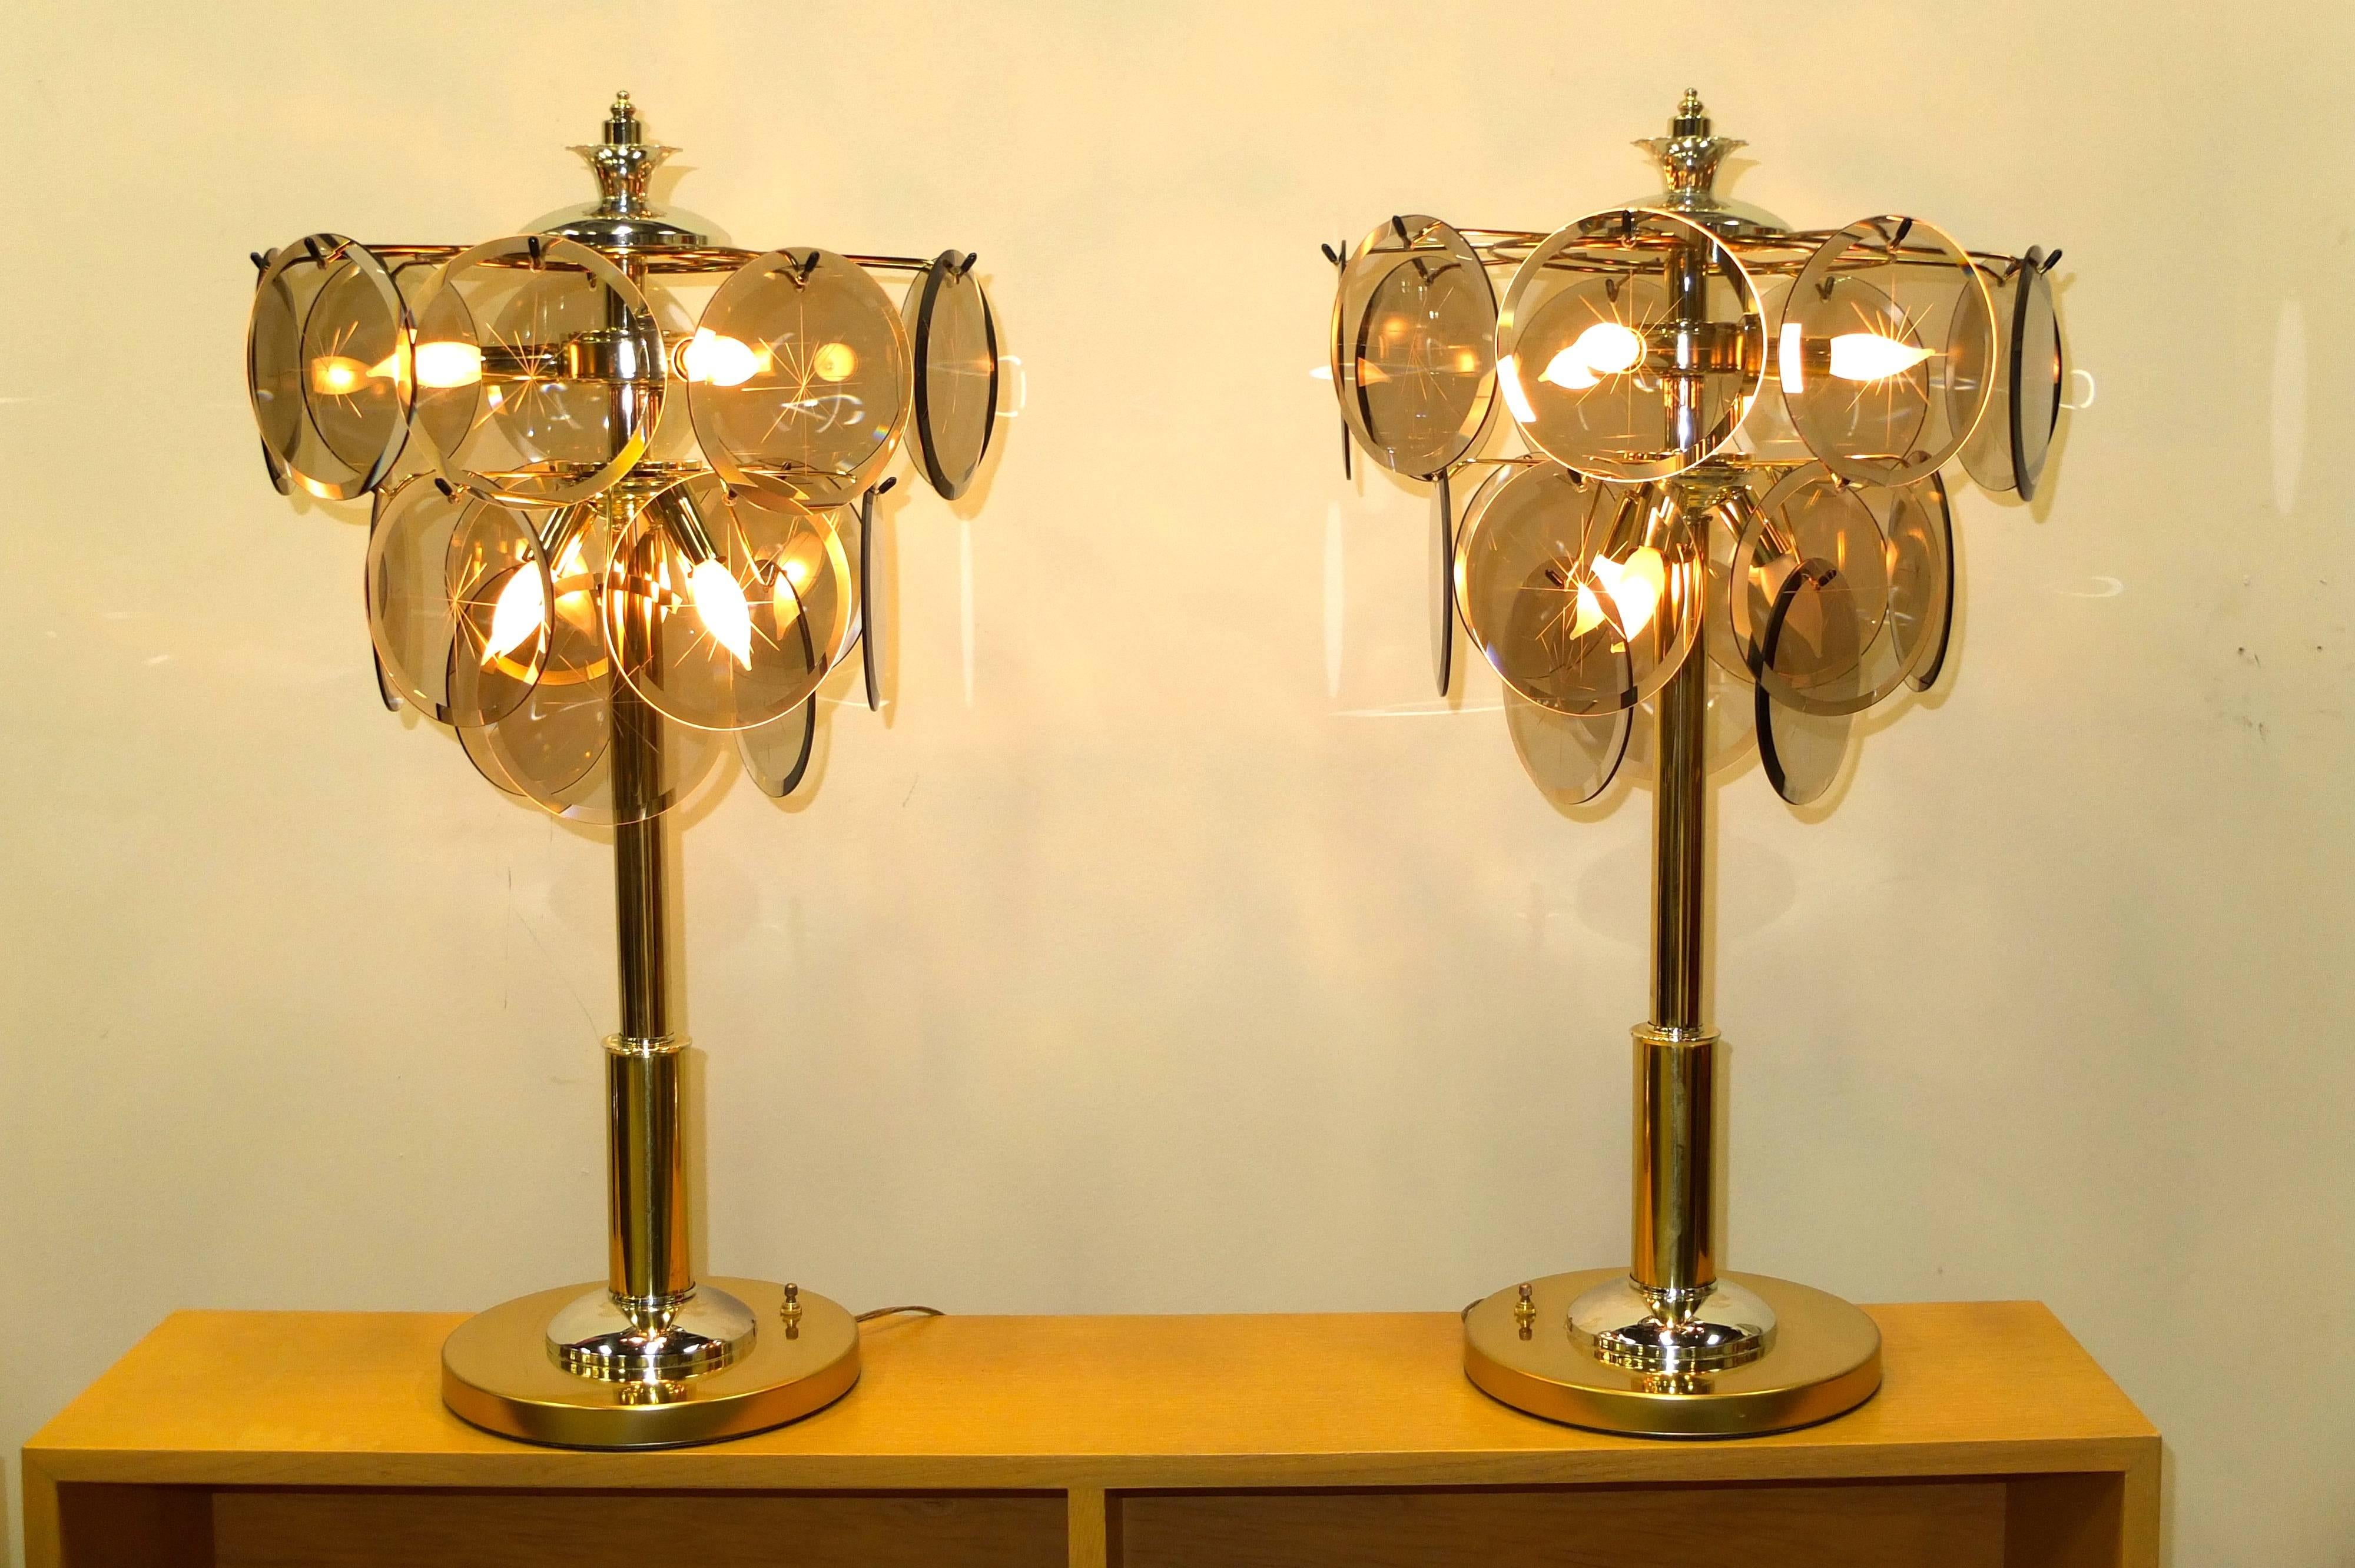 These vintage table lamps are in immaculate, almost new old stock condition. Produced by Triarch Miami inspired by Vistosi's famous Murano glass disk chandeliers, tall art deco style columns in chrome and brass plate rise to a double tier scaffold